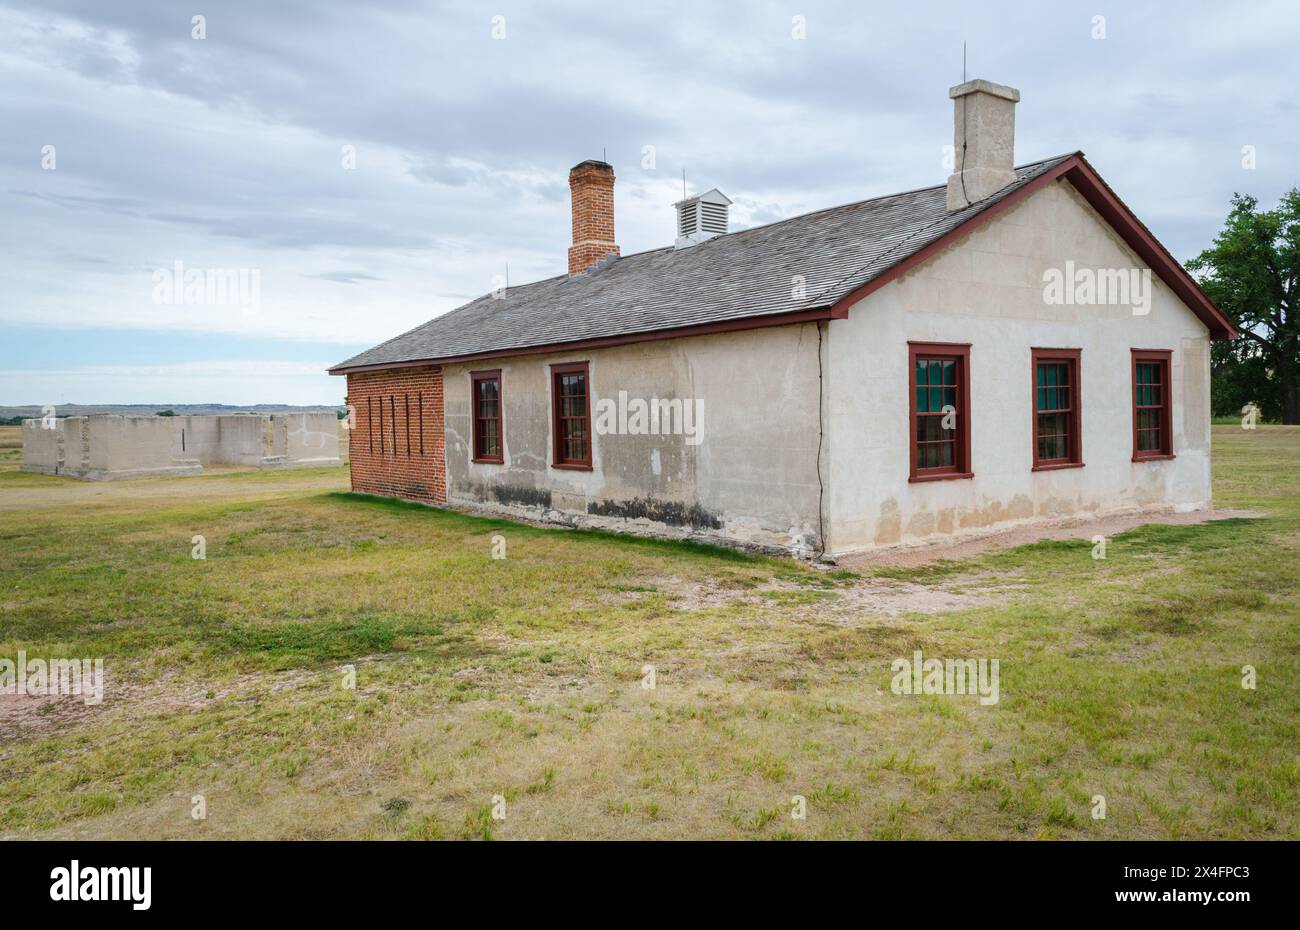 Fort Laramie National Historic Site, Trading Post, Diplomatic Site, and Military Installation in Wyoming, USA Stock Photo